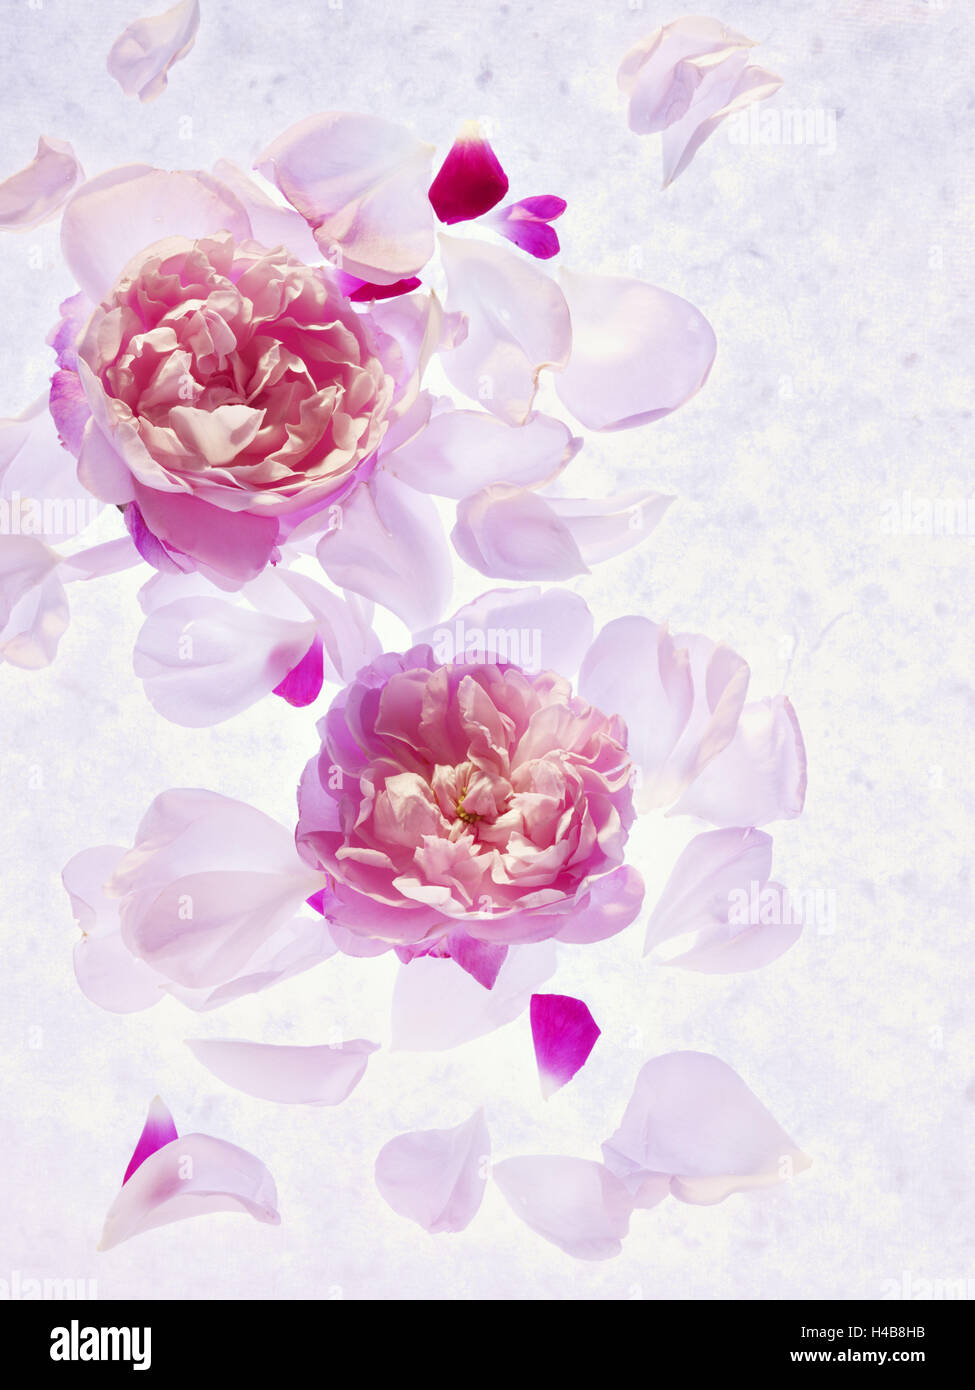 Peonies, blossoms, petals, pink, rose, white, still life, Stock Photo